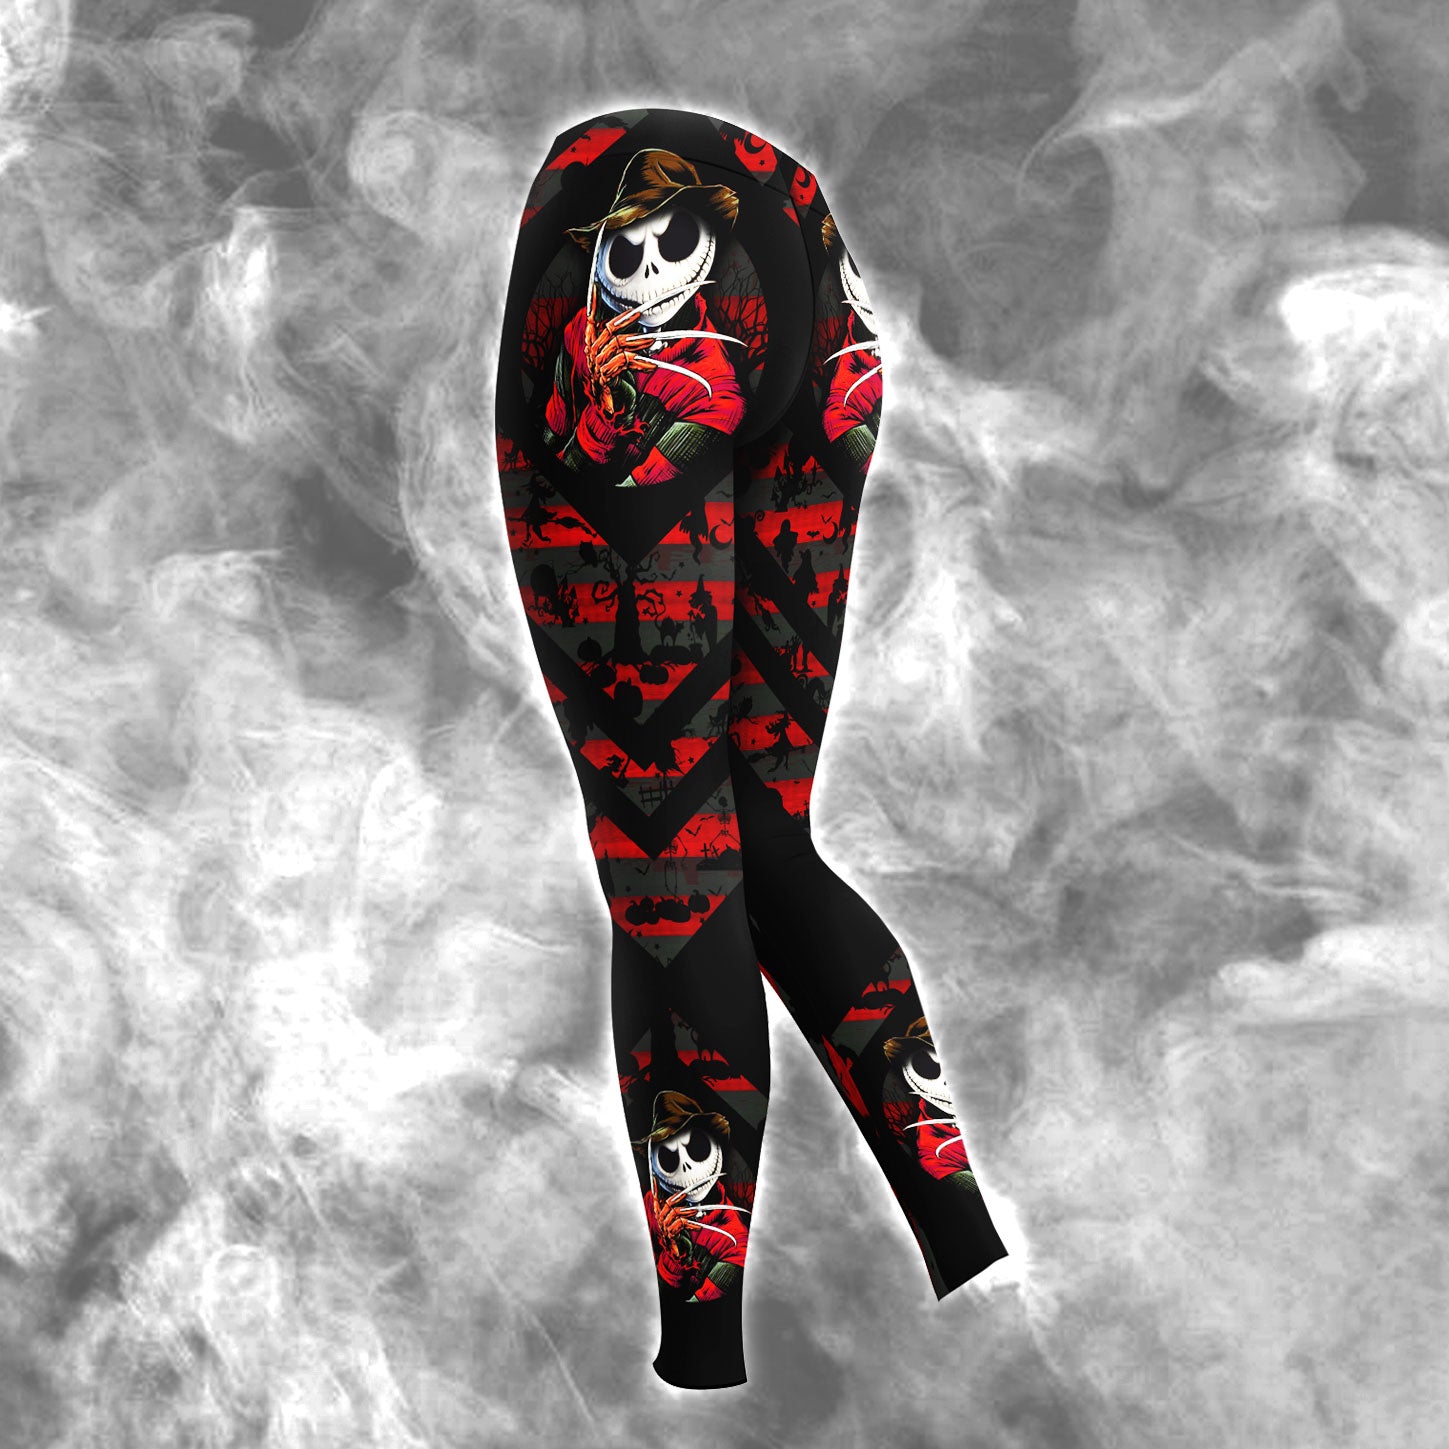 Dark Nightmare Art Theme Combo Hoodie and Leggings - Dark and edgy matching set with skull designs for a unique and stylish look.